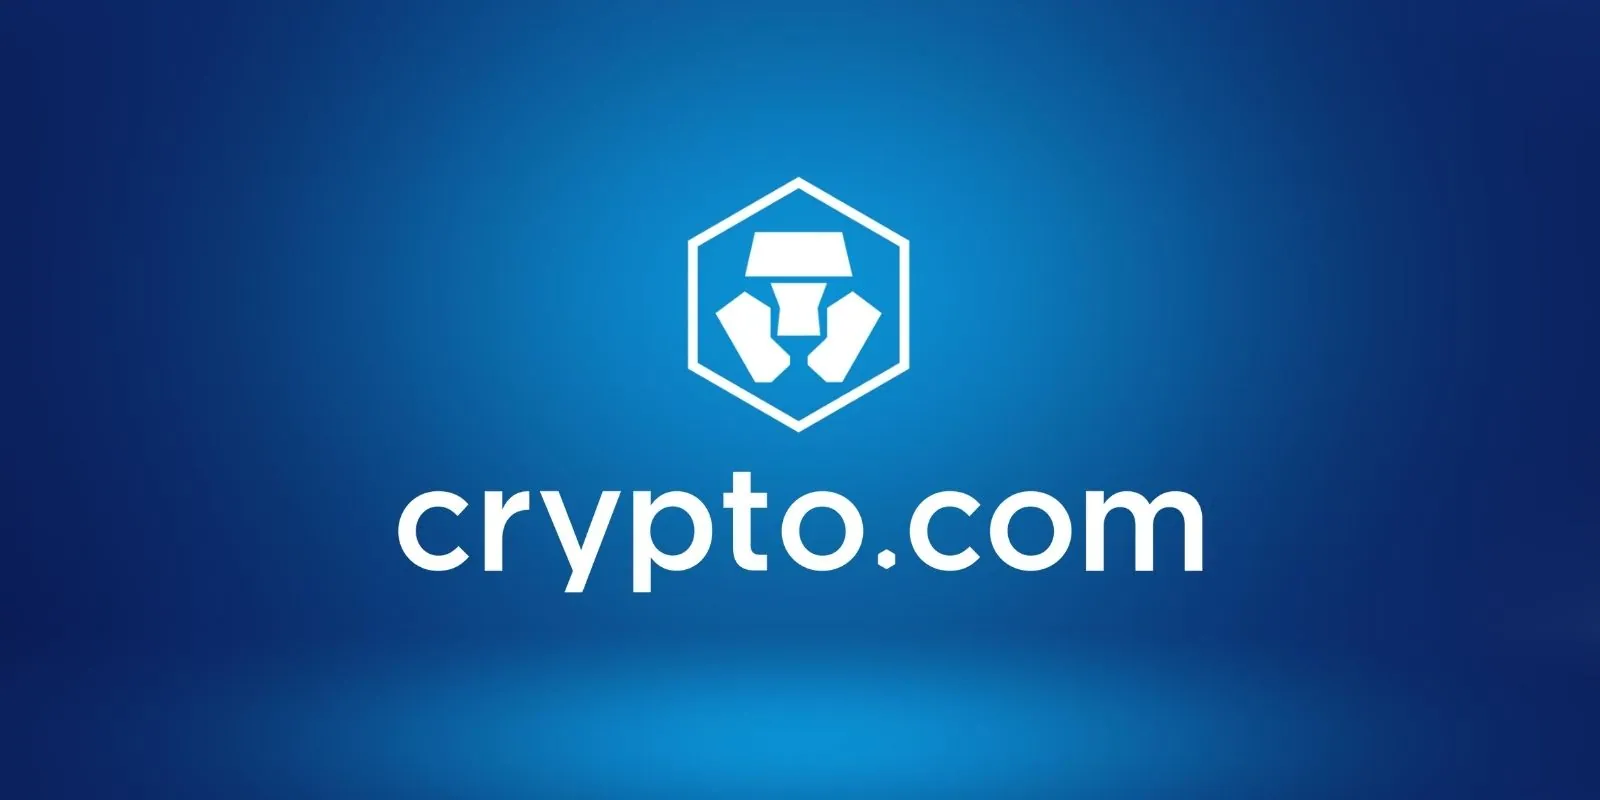 How To Download Your Transaction History On Crypto.Com